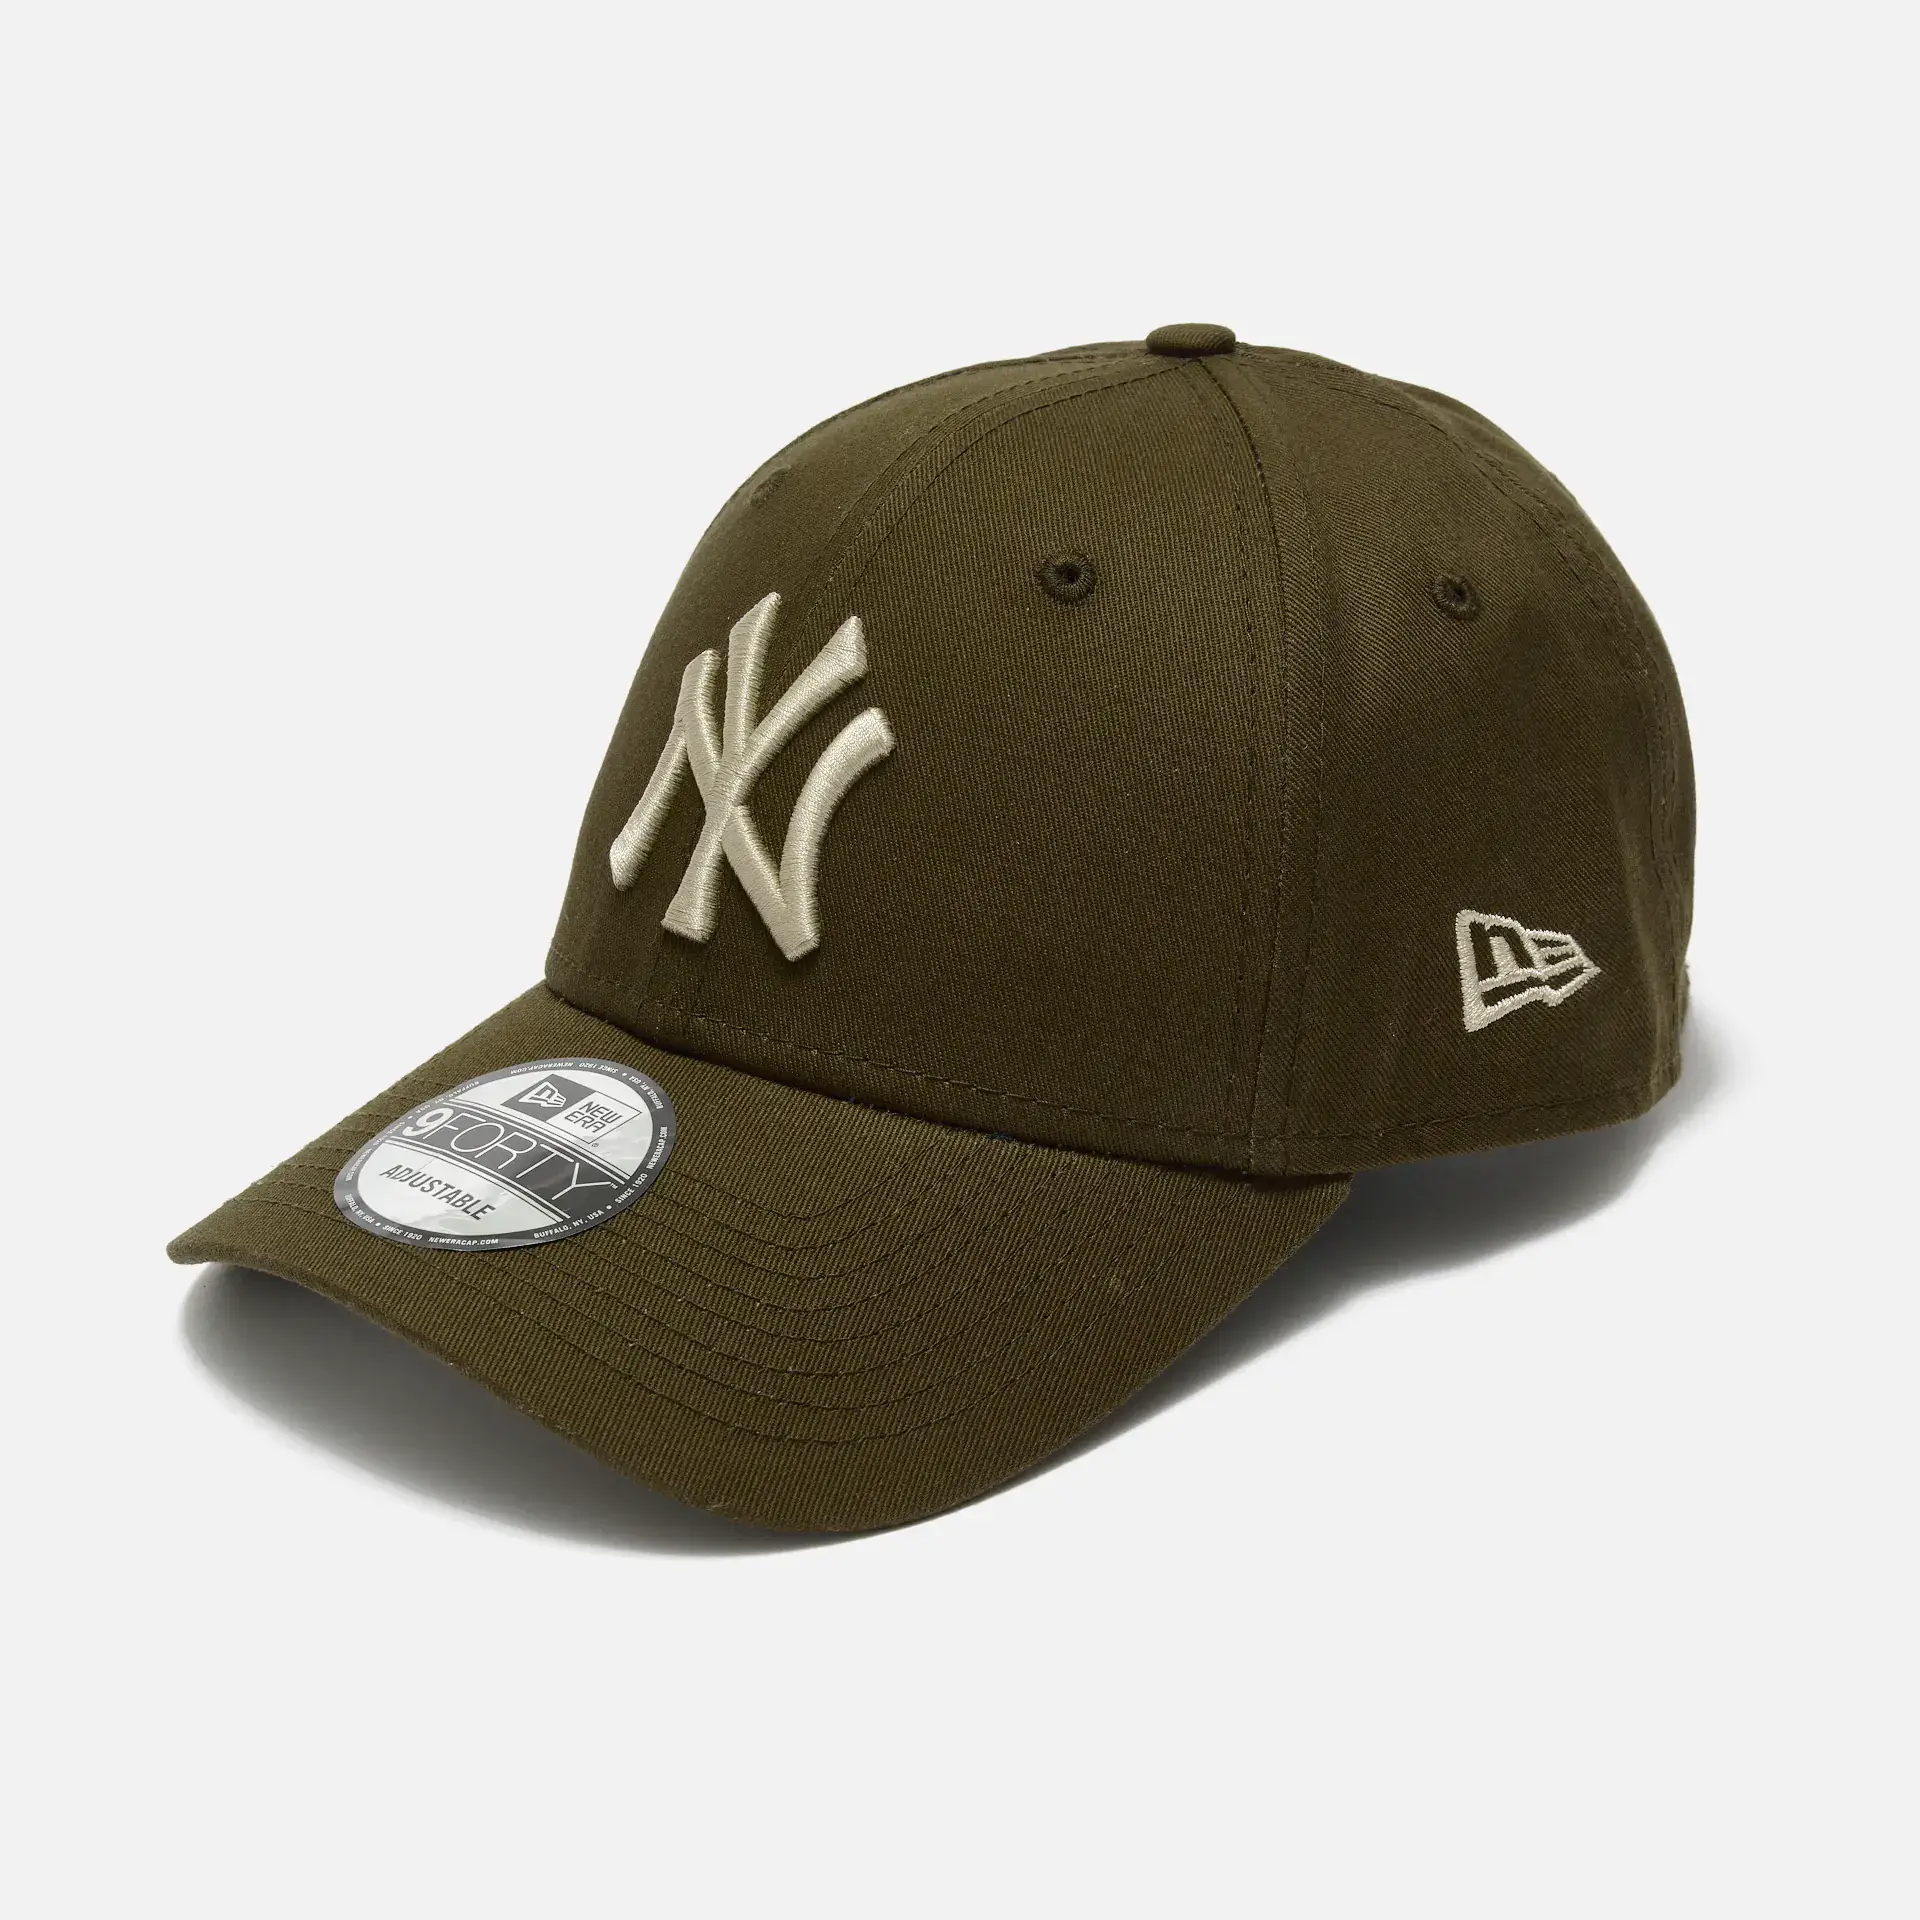 New Era MLB NY Yankees League Essential 9Forty Strapback Cap Brown/Stone